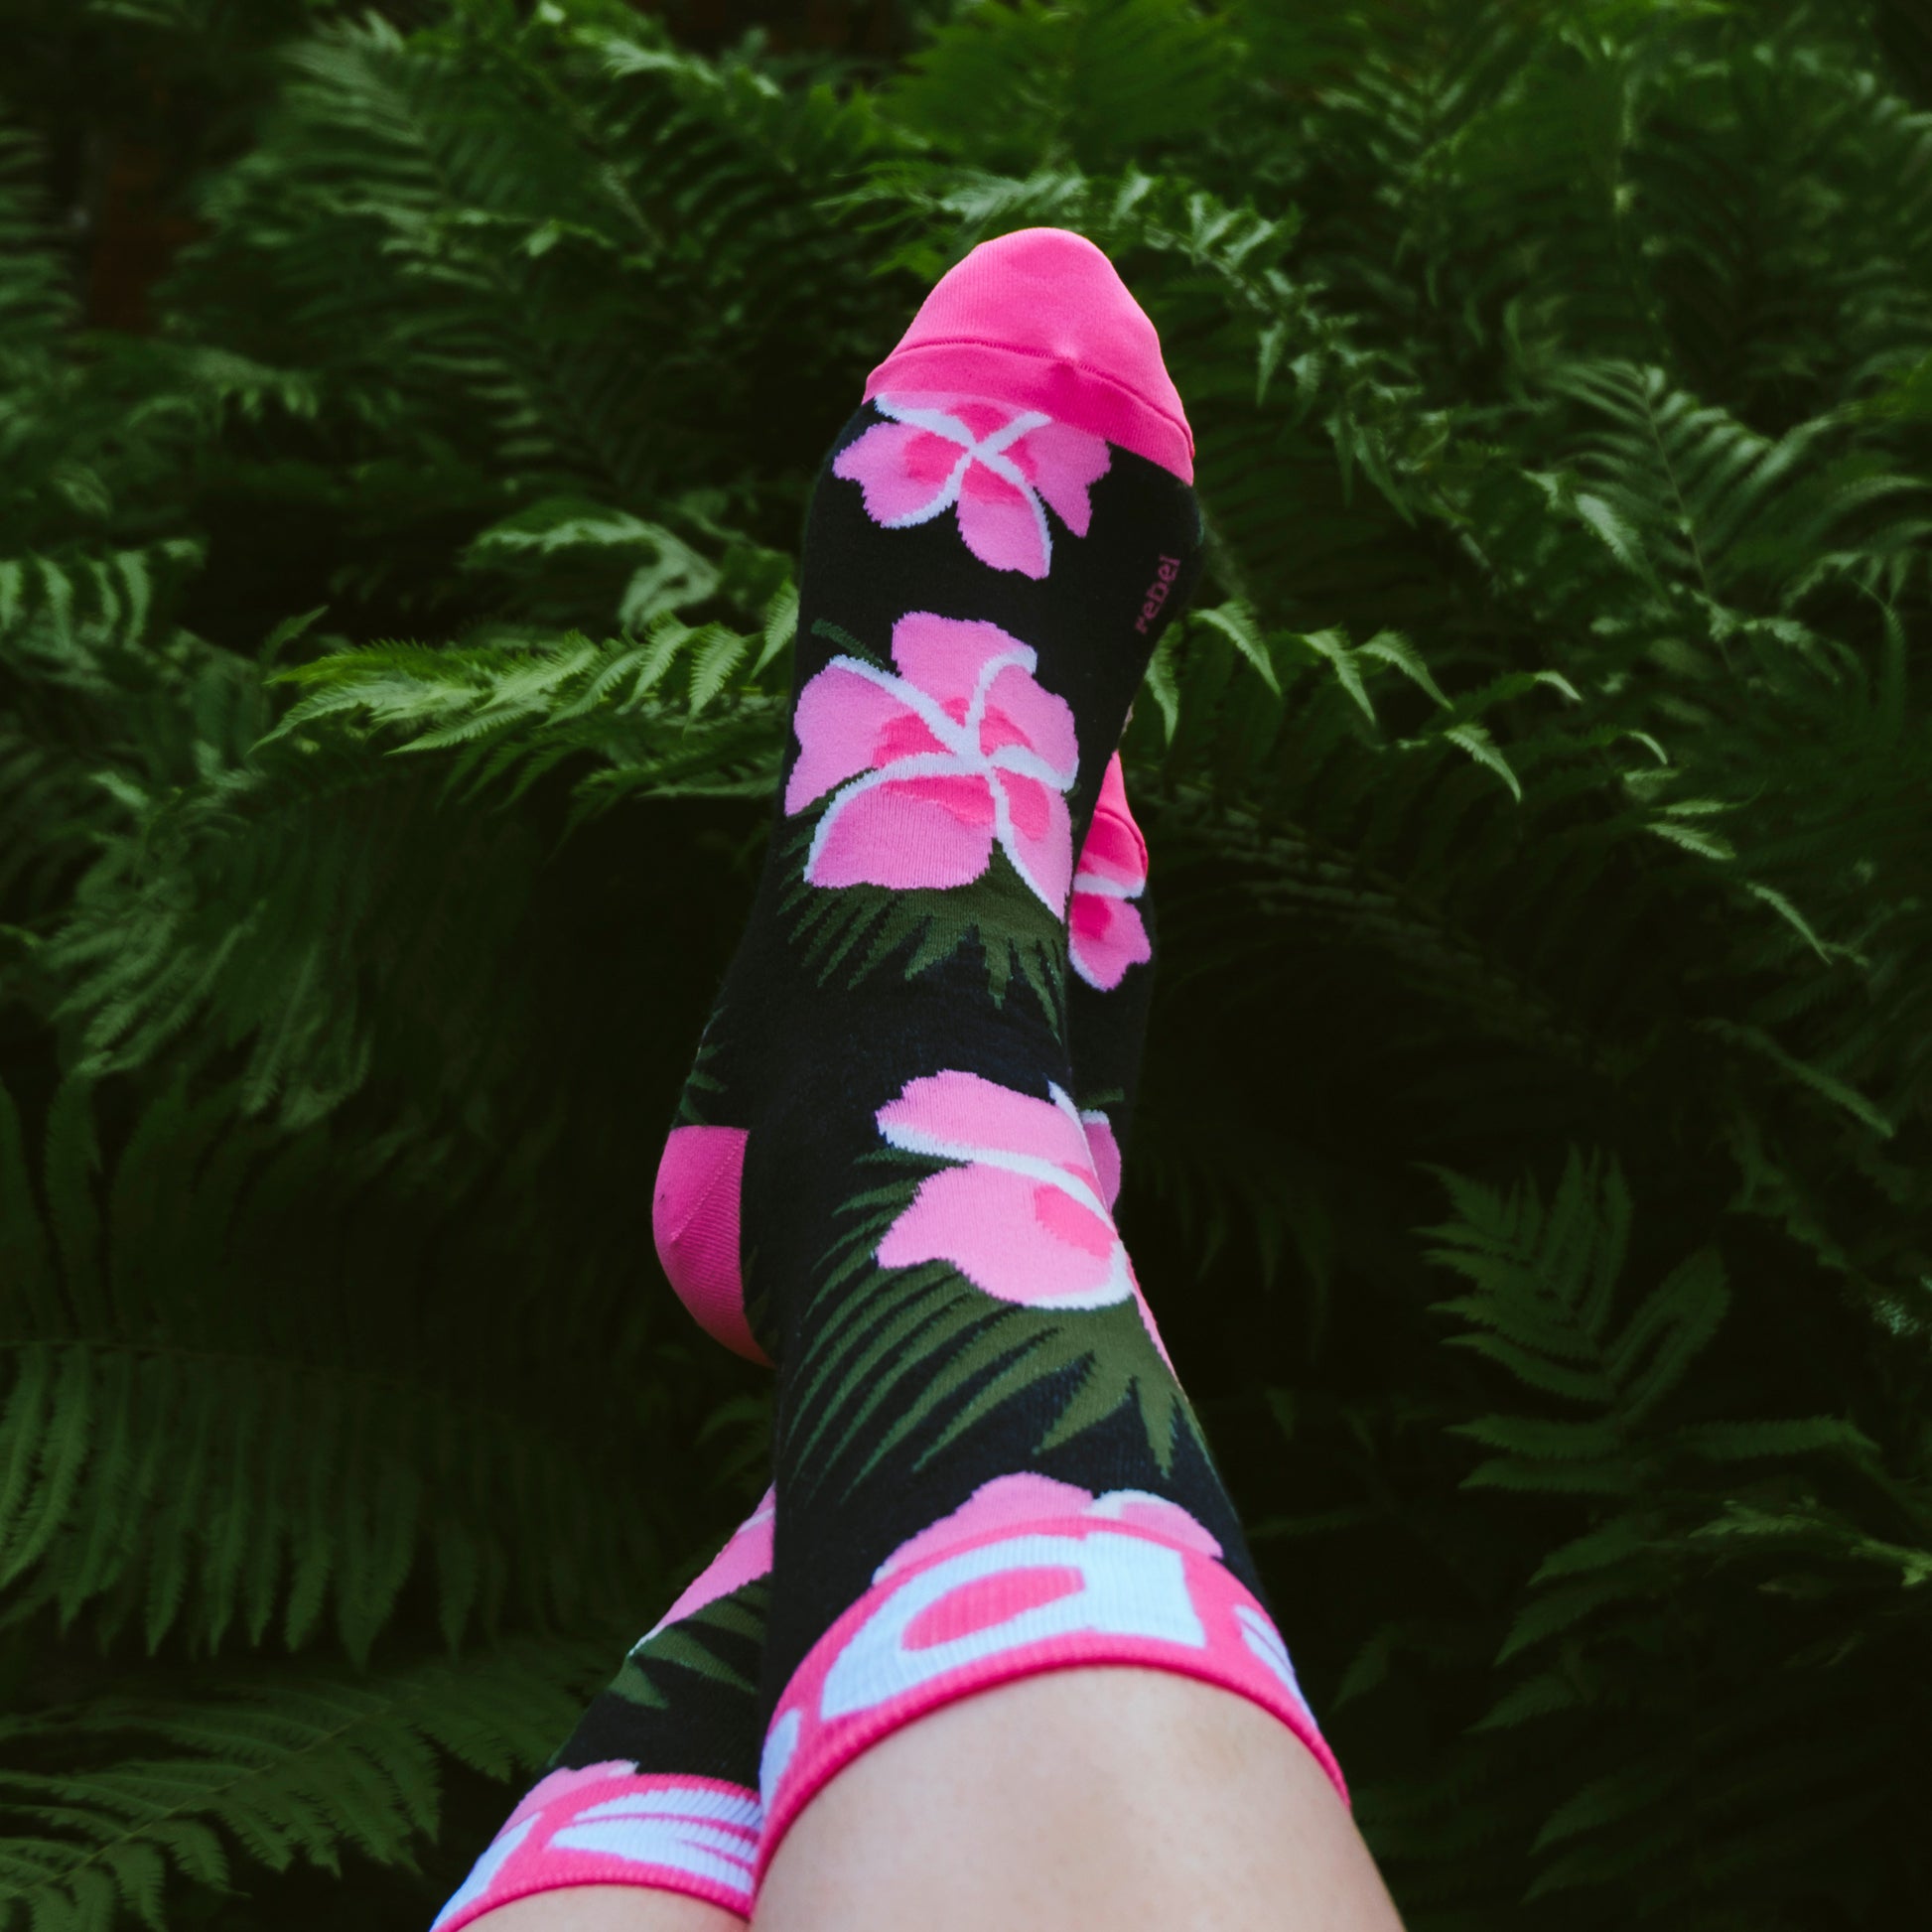 Order now and take your sock game to the next level with Rebel Fashion's Tropical Flower Socks!